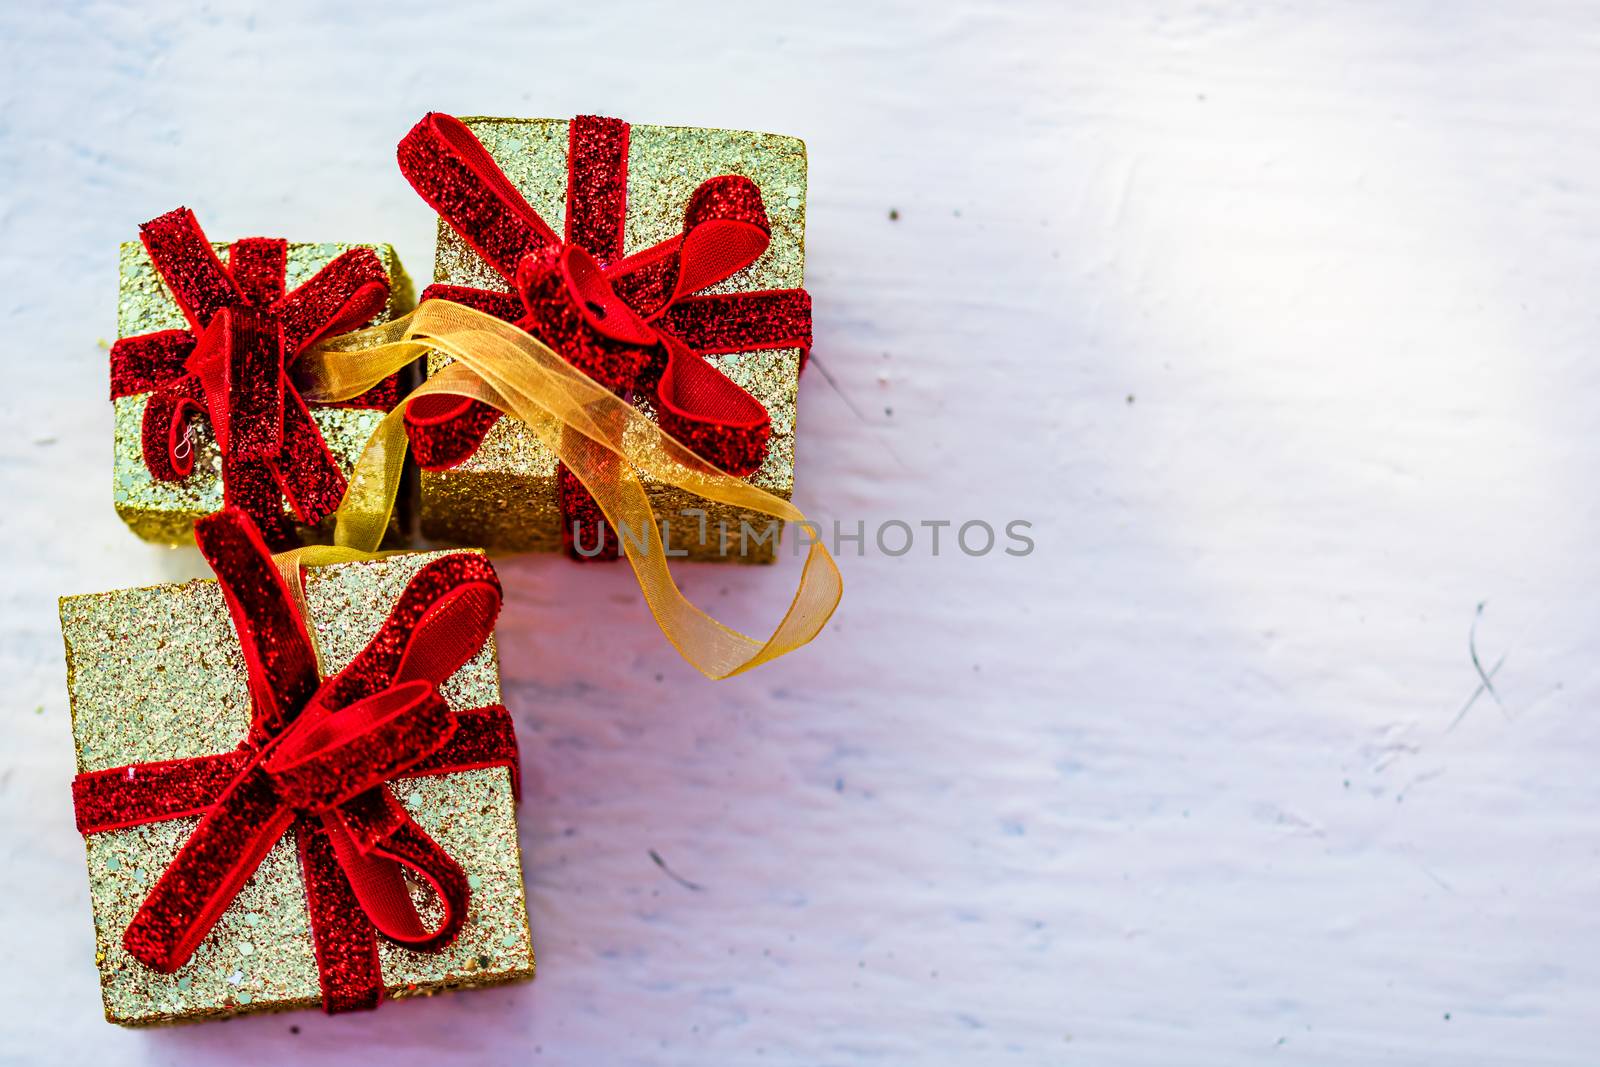 Glittery Christmas gifts. Christmas present boxex decorations isolated.